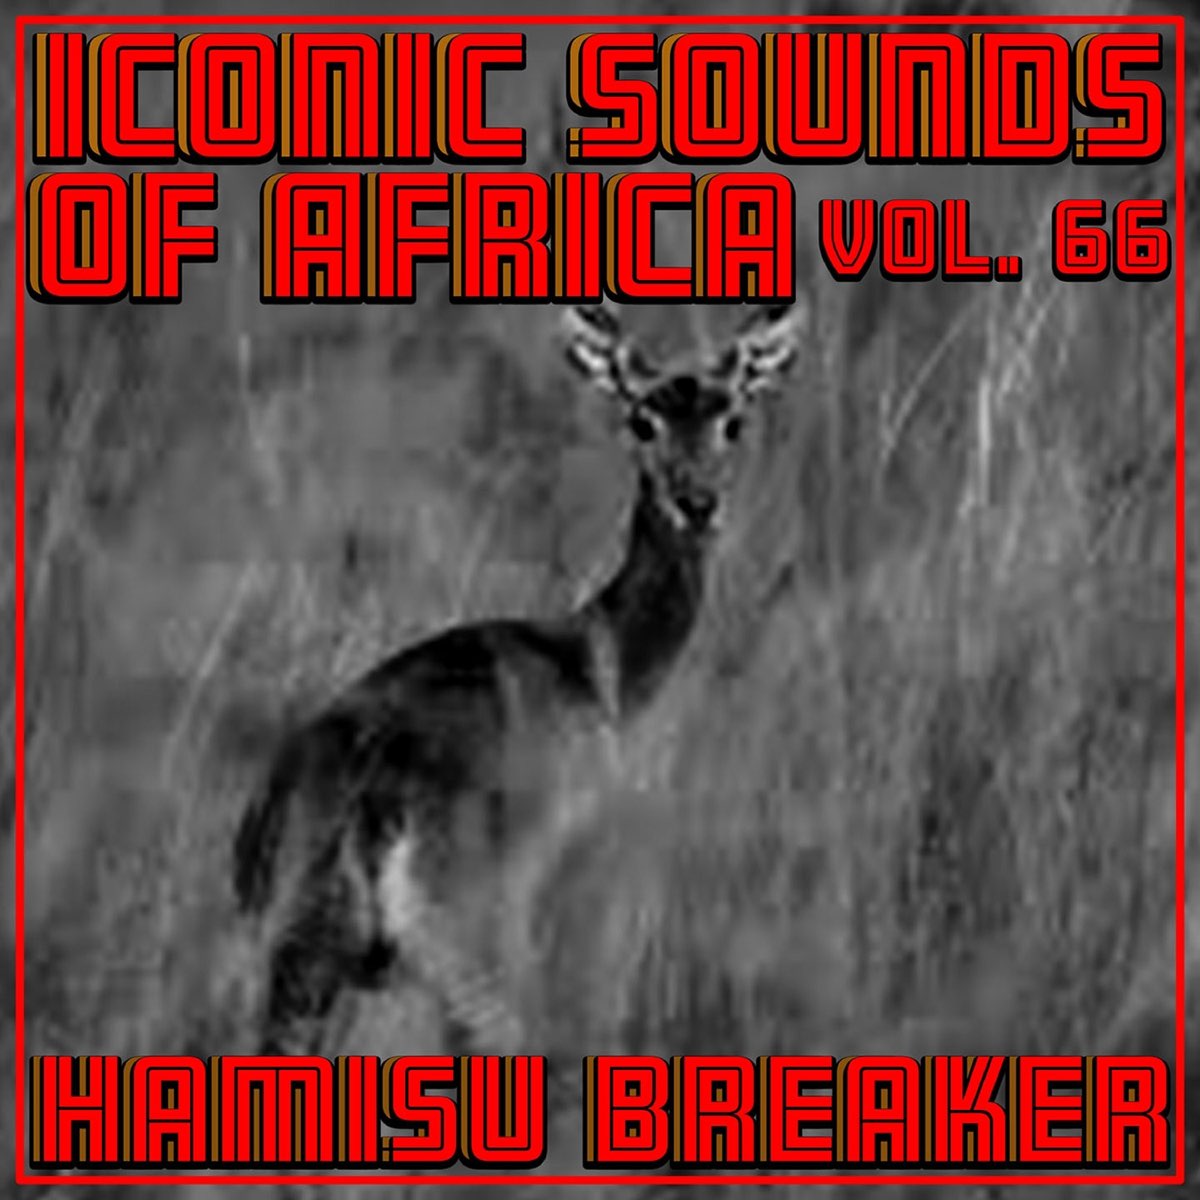 Iconic Sounds of Africa, Vol. 66 - EP by Hamisu Breaker on Apple Music